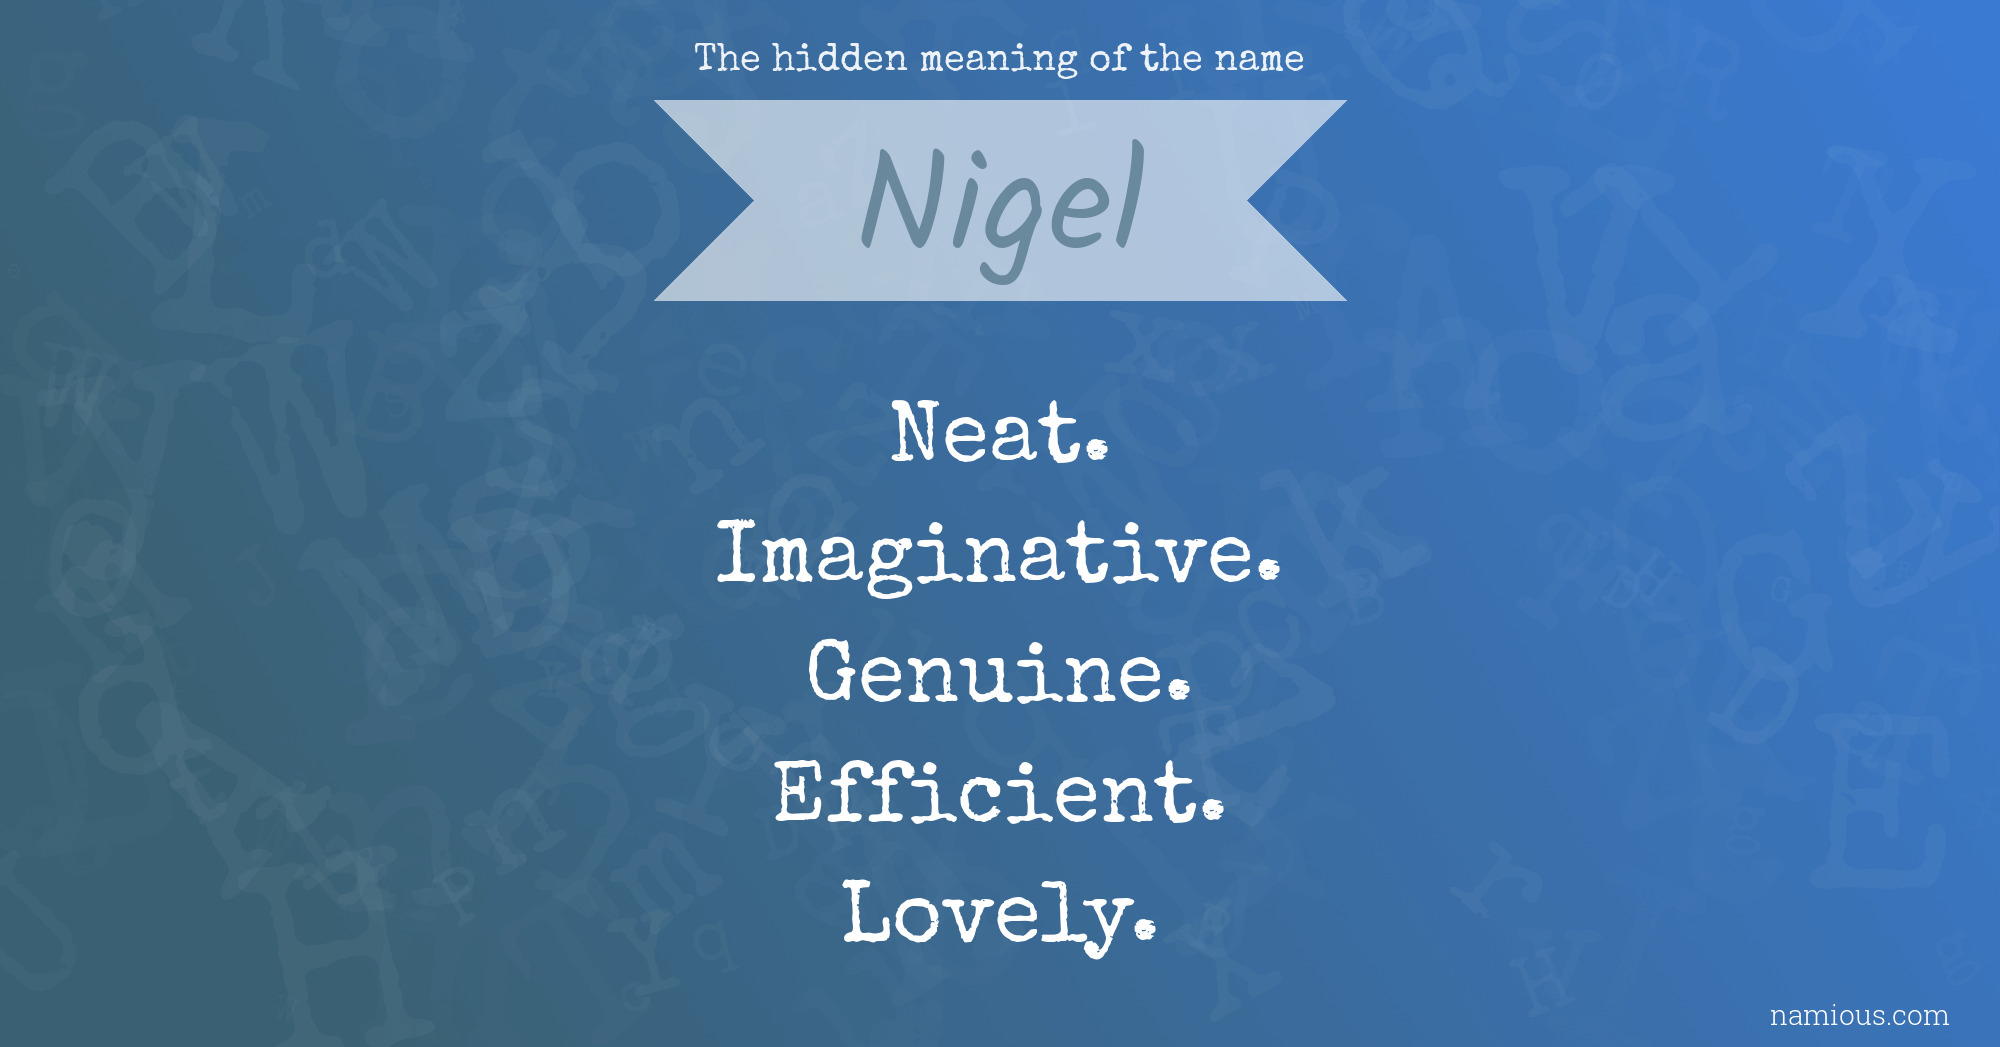 The hidden meaning of the name Nigel